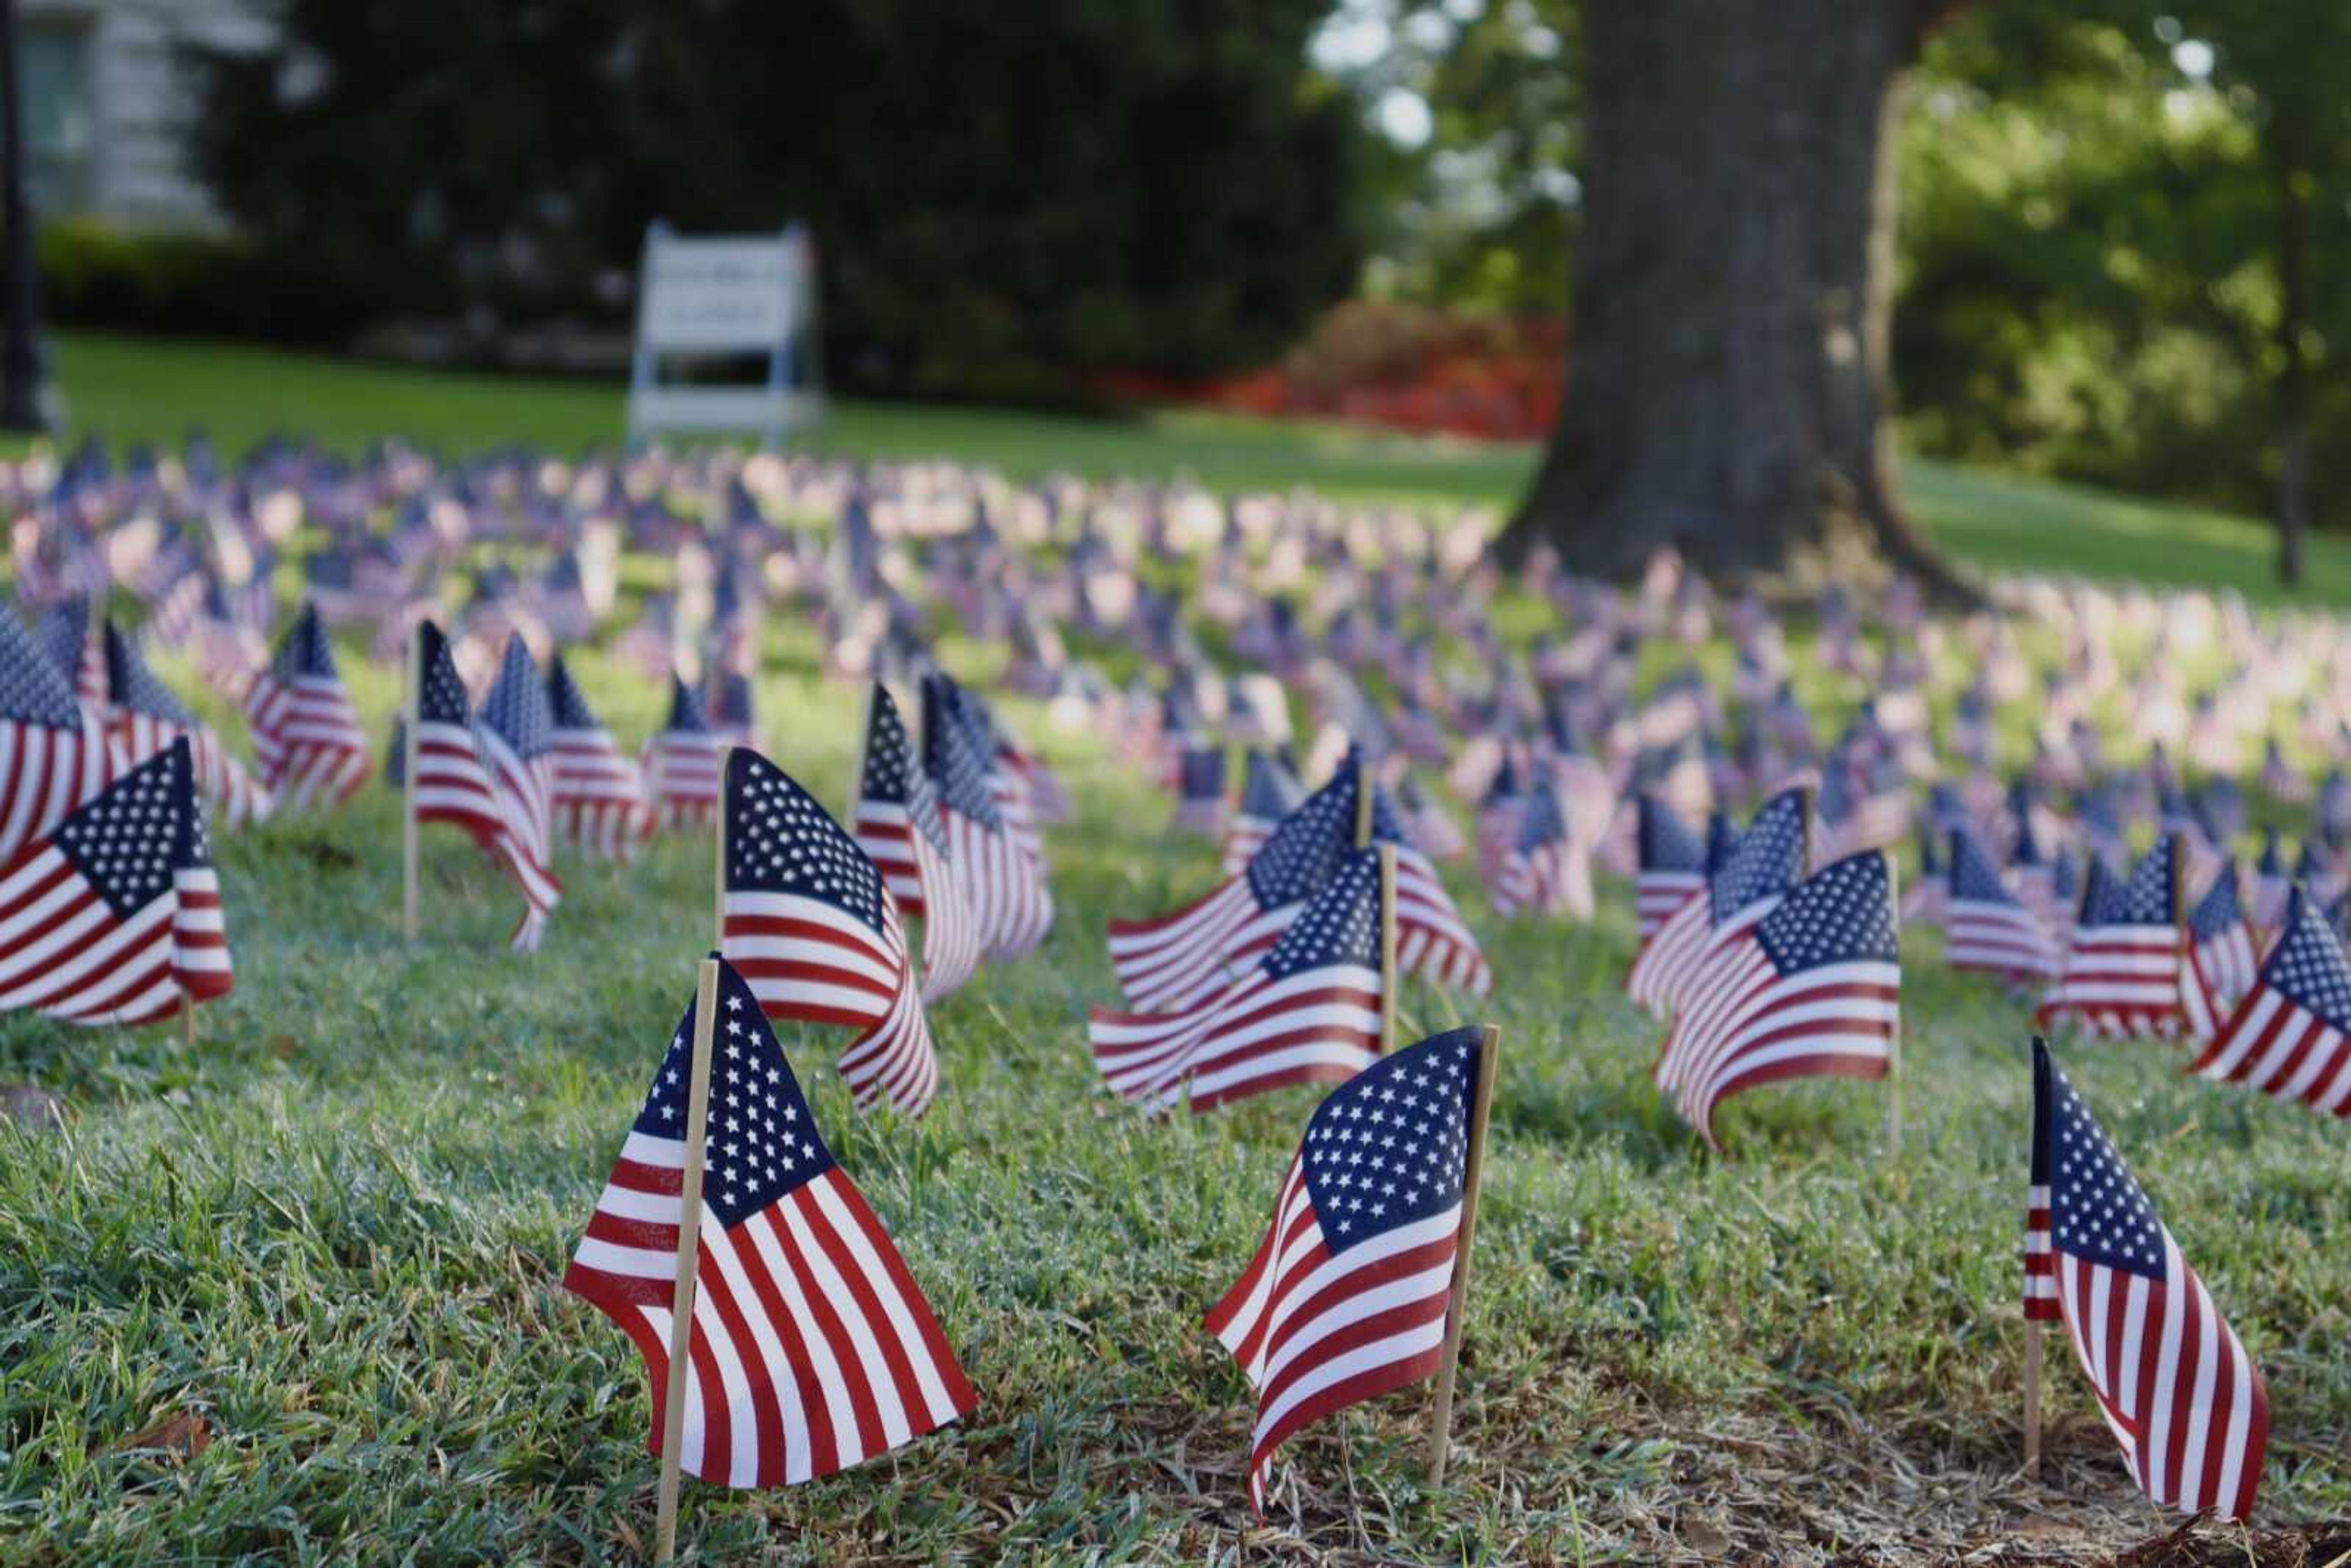 Nearly 3,000 mini American flags were placed in front of Academic Hall for the Annual Patriot Day gathering. The flags represent the 2,977 victims of the Sept. 11 tragedy.